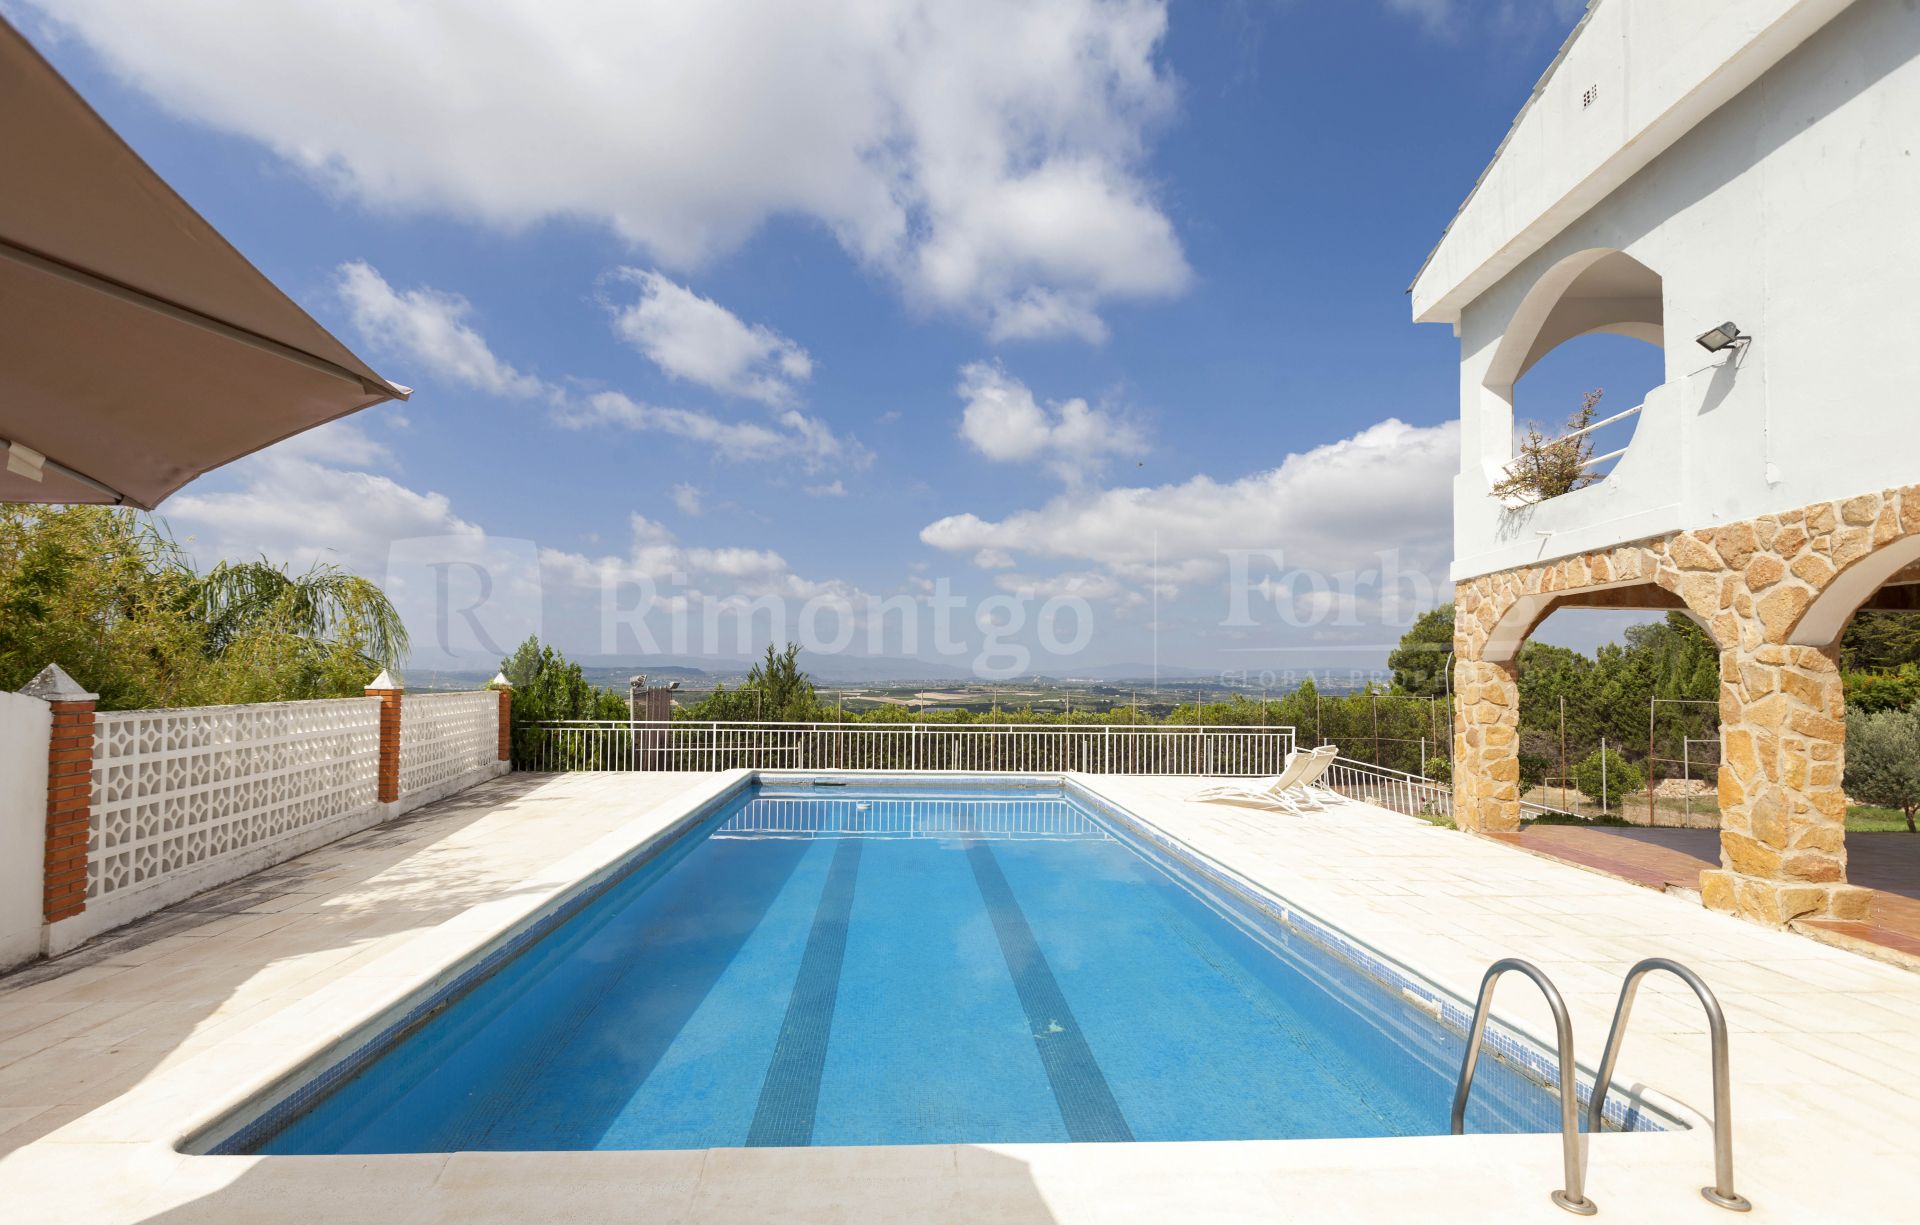 Traditional-style villa for sale in Calicanto, Torrent, Valencia.